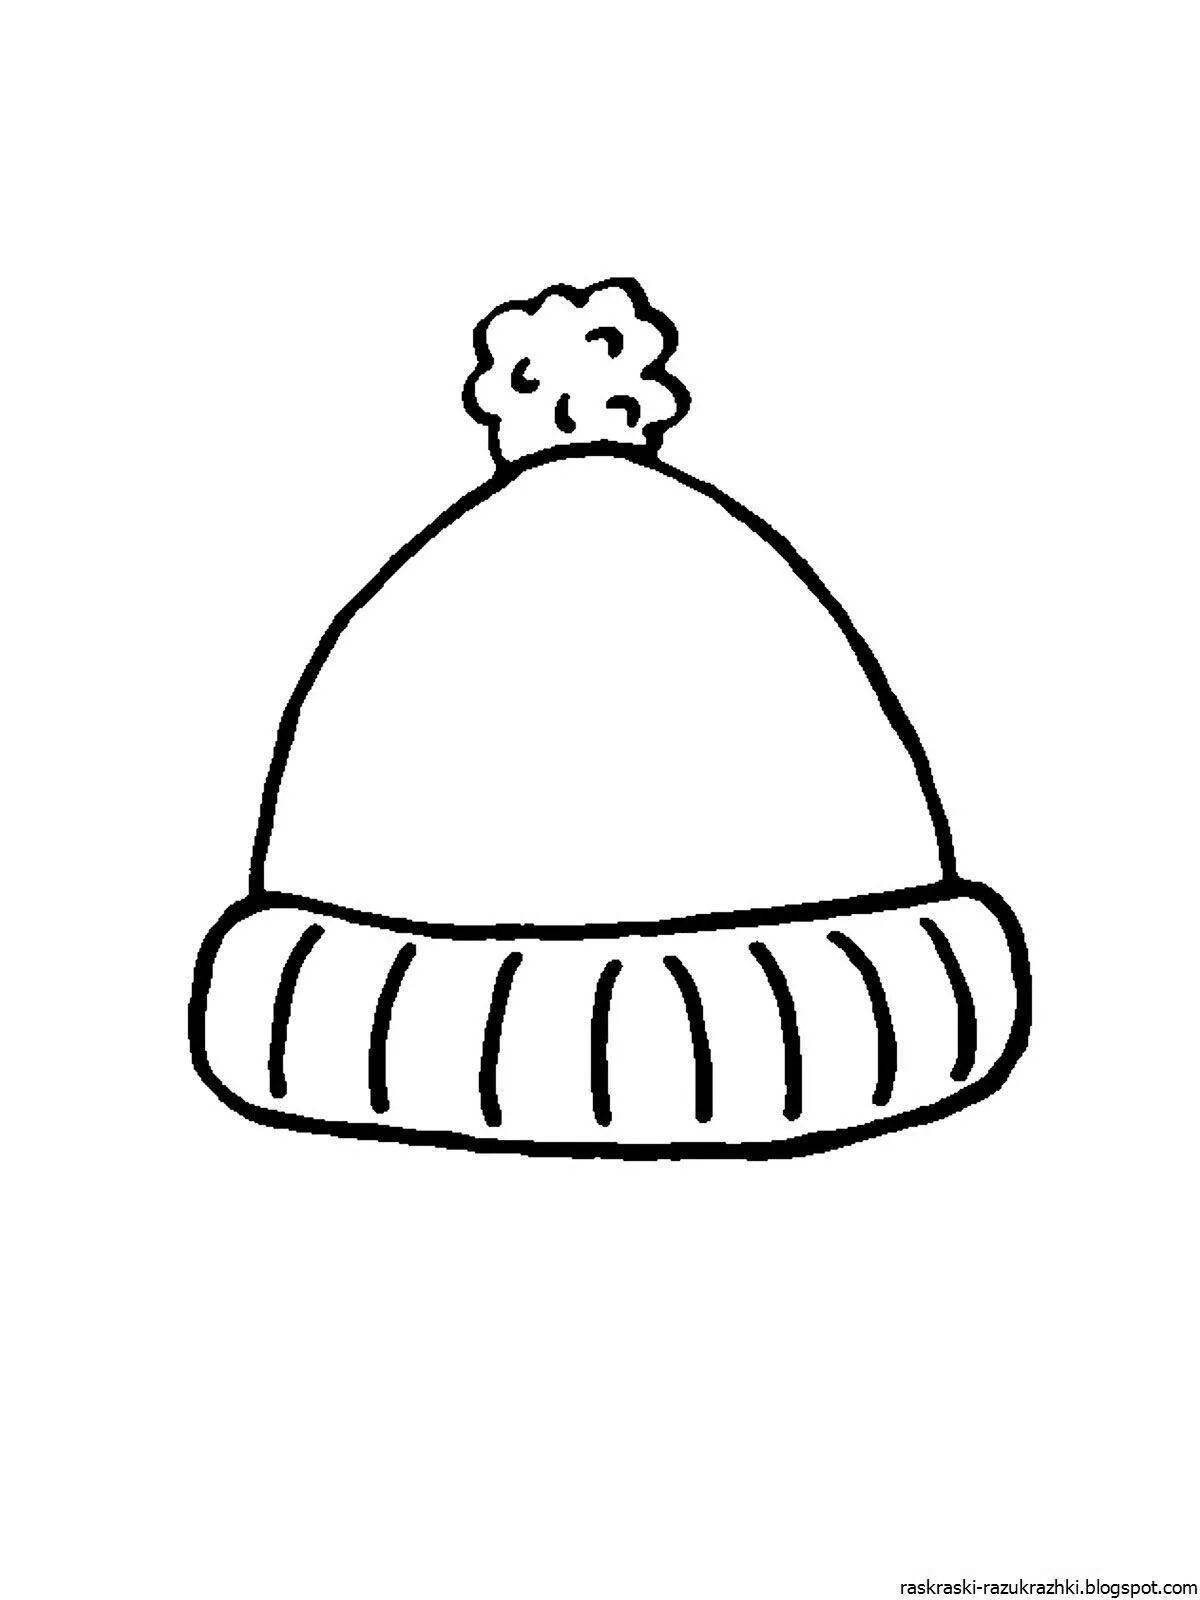 Cute winter hat coloring book for kids